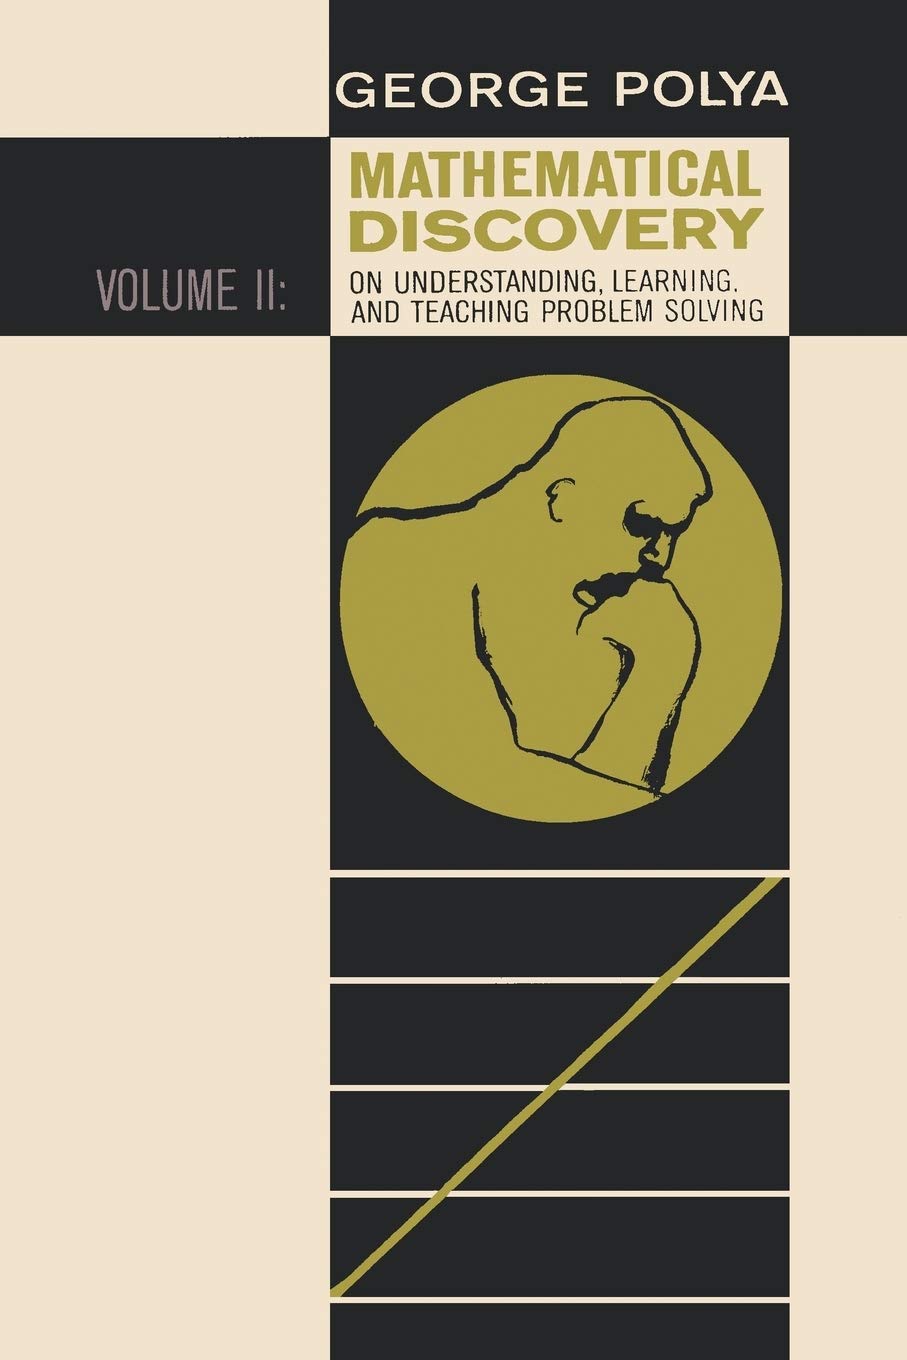 MATHEMATICAL DISCOVERY ON UNDERSTANDING, LEARNING, AND TEACHING PROBLEM SOLVING: VOLUME II